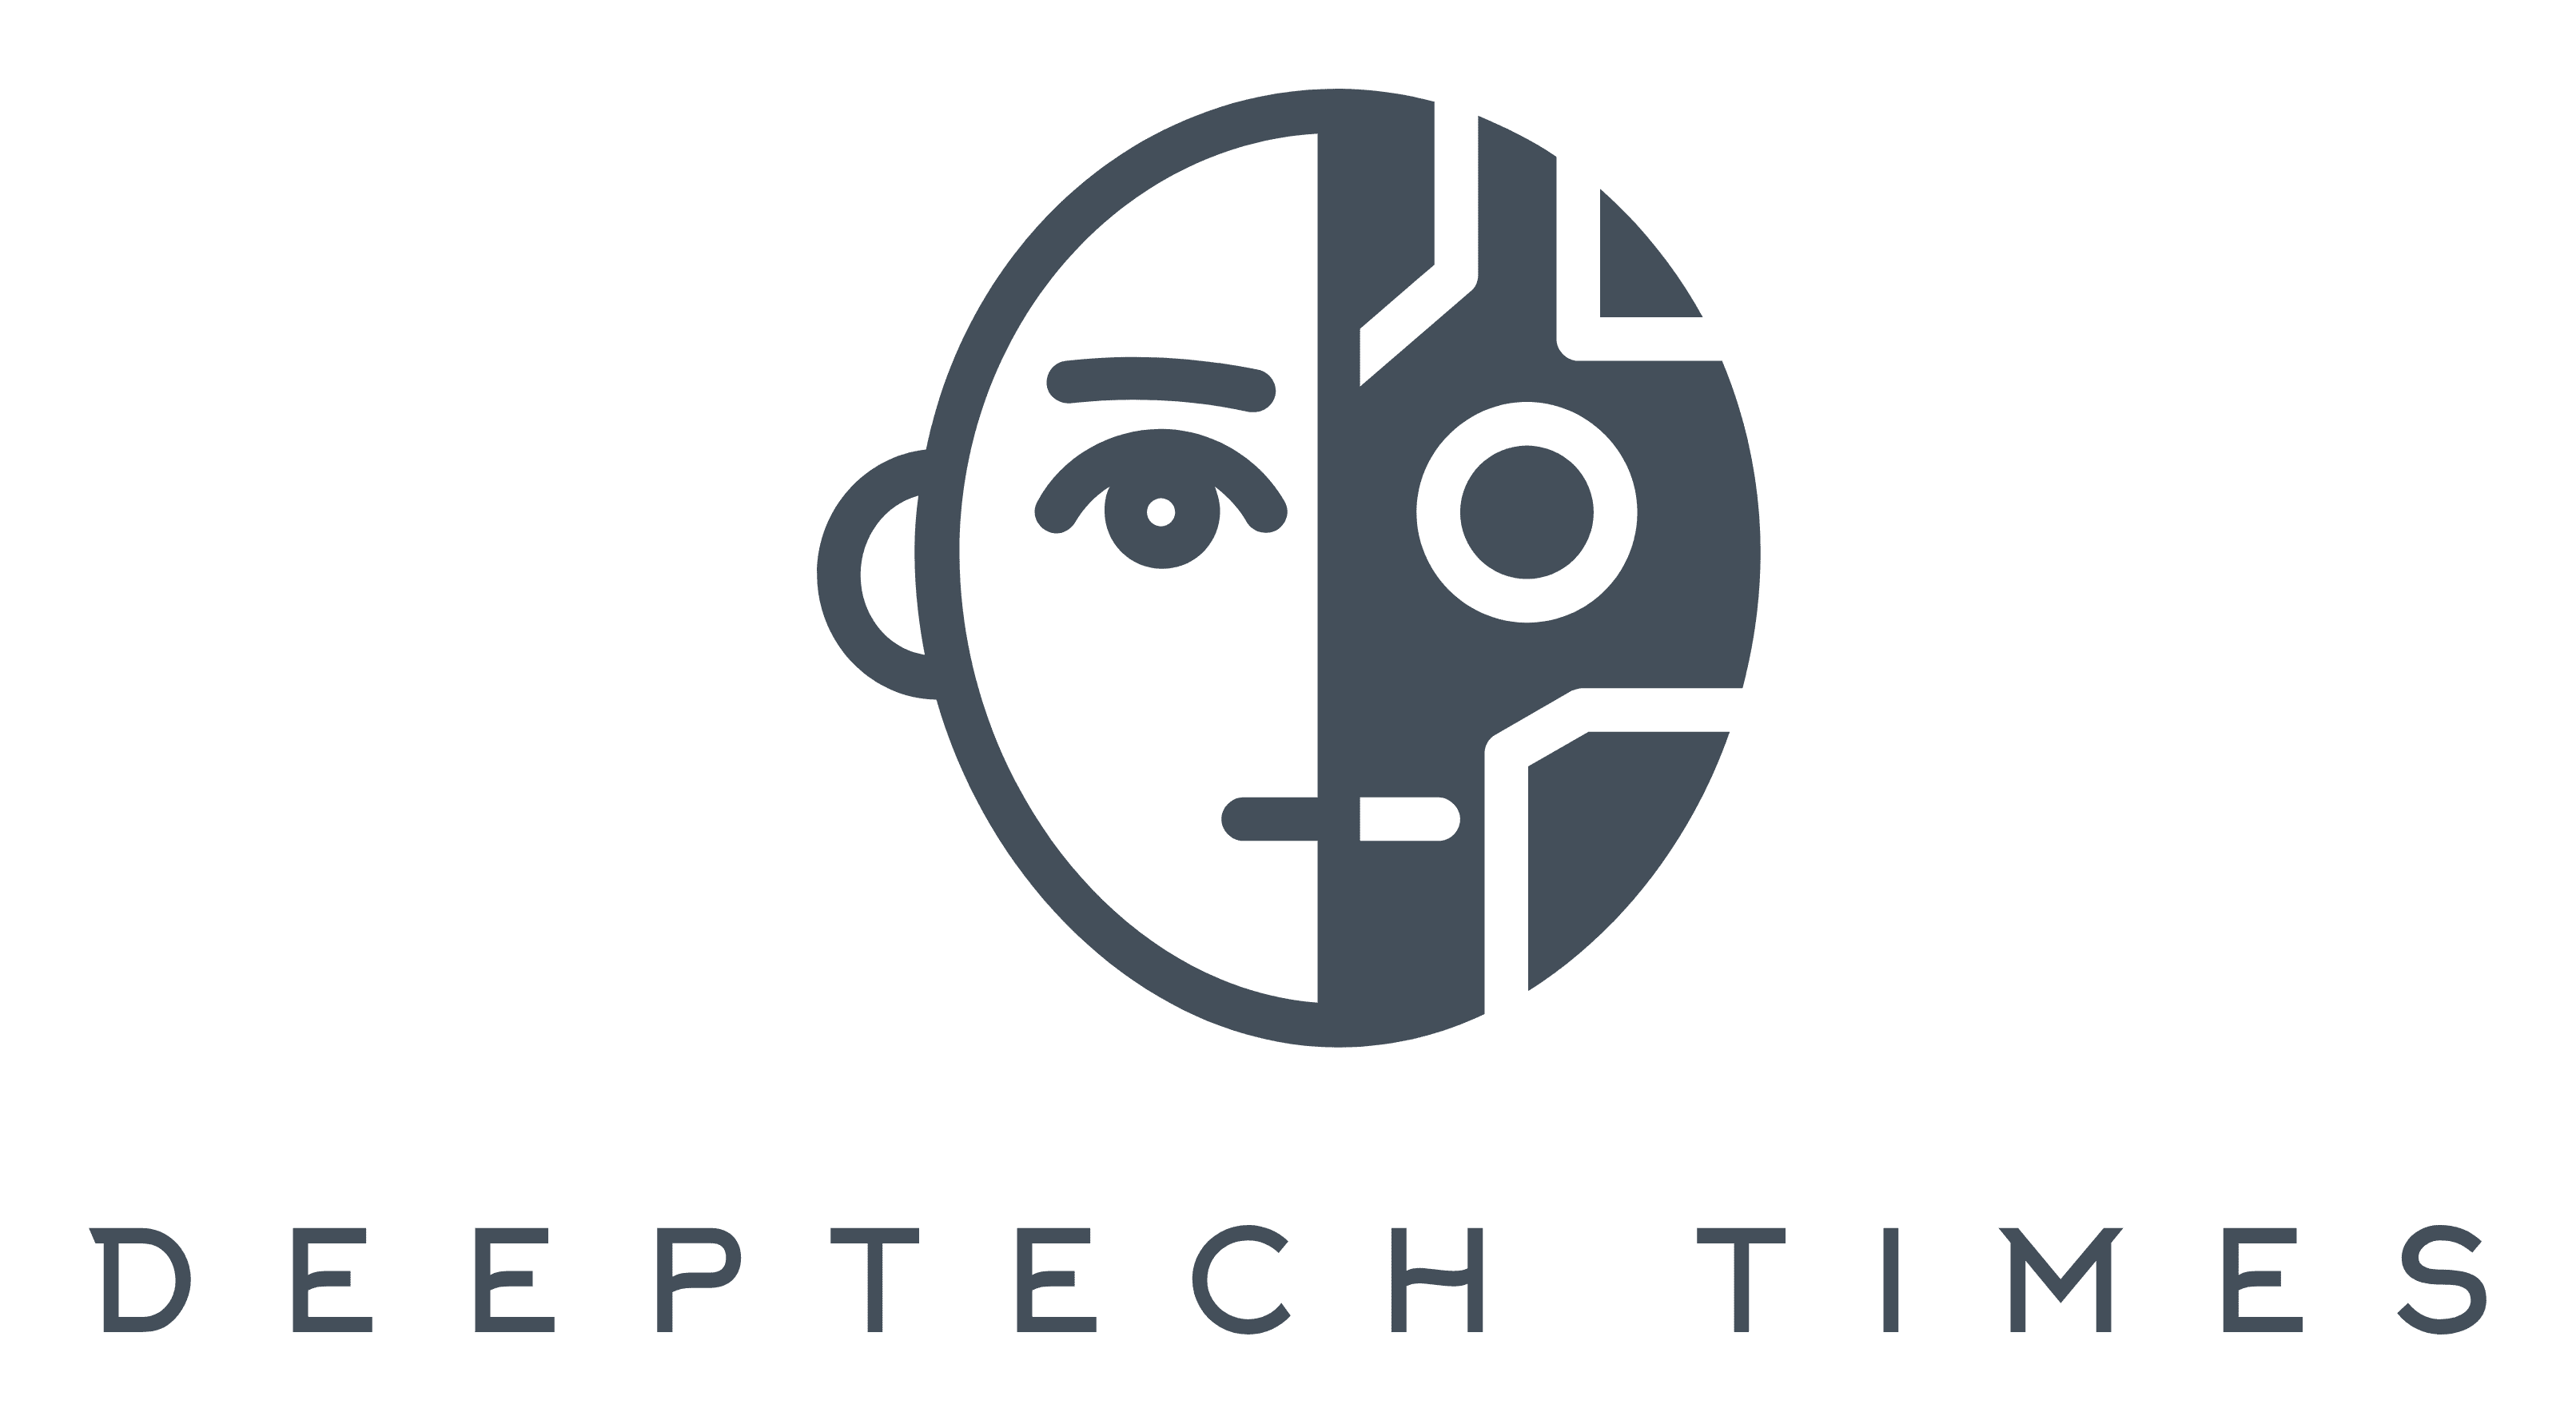 , Deeptech Times goes live to aid understanding of deep tech and informed decision making among industry stakeholders in Asia